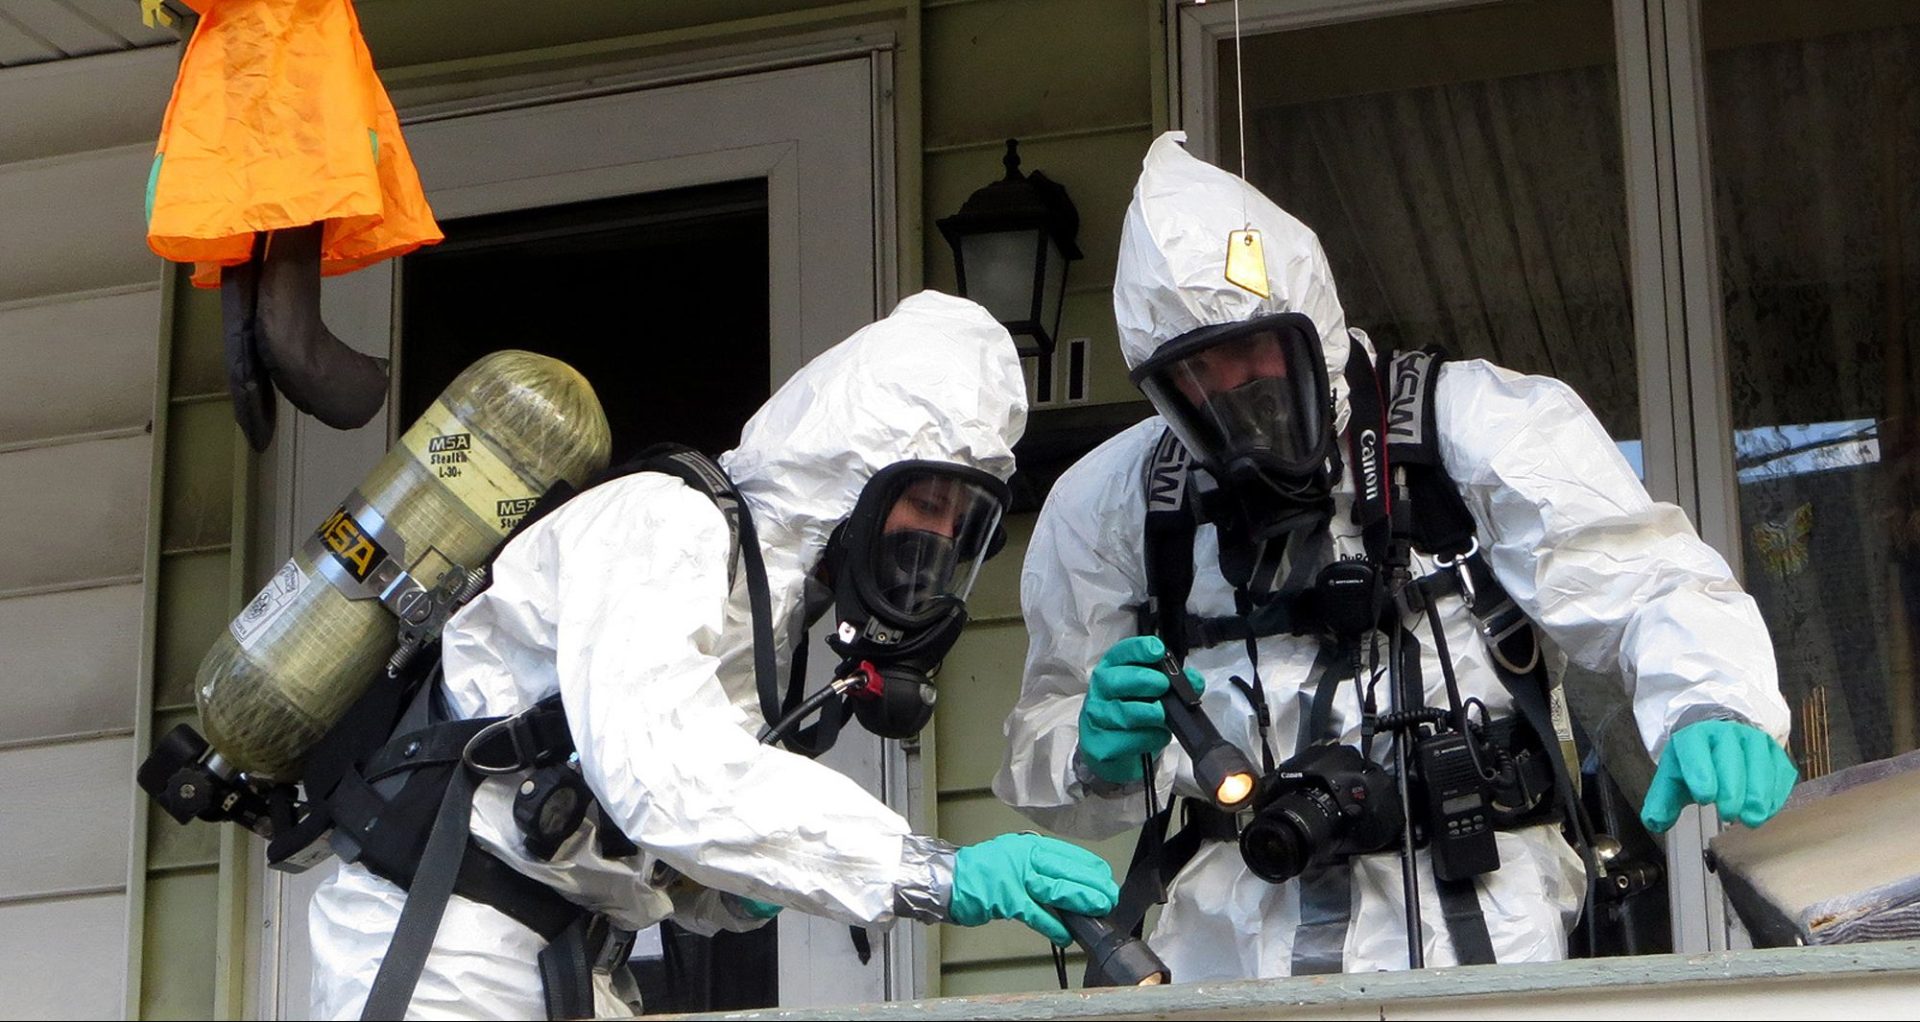 Members of the Pennsylvania State Police Clandestine Lab Response Team remove chemicals from the front porch of a home in Minersville in 2013.